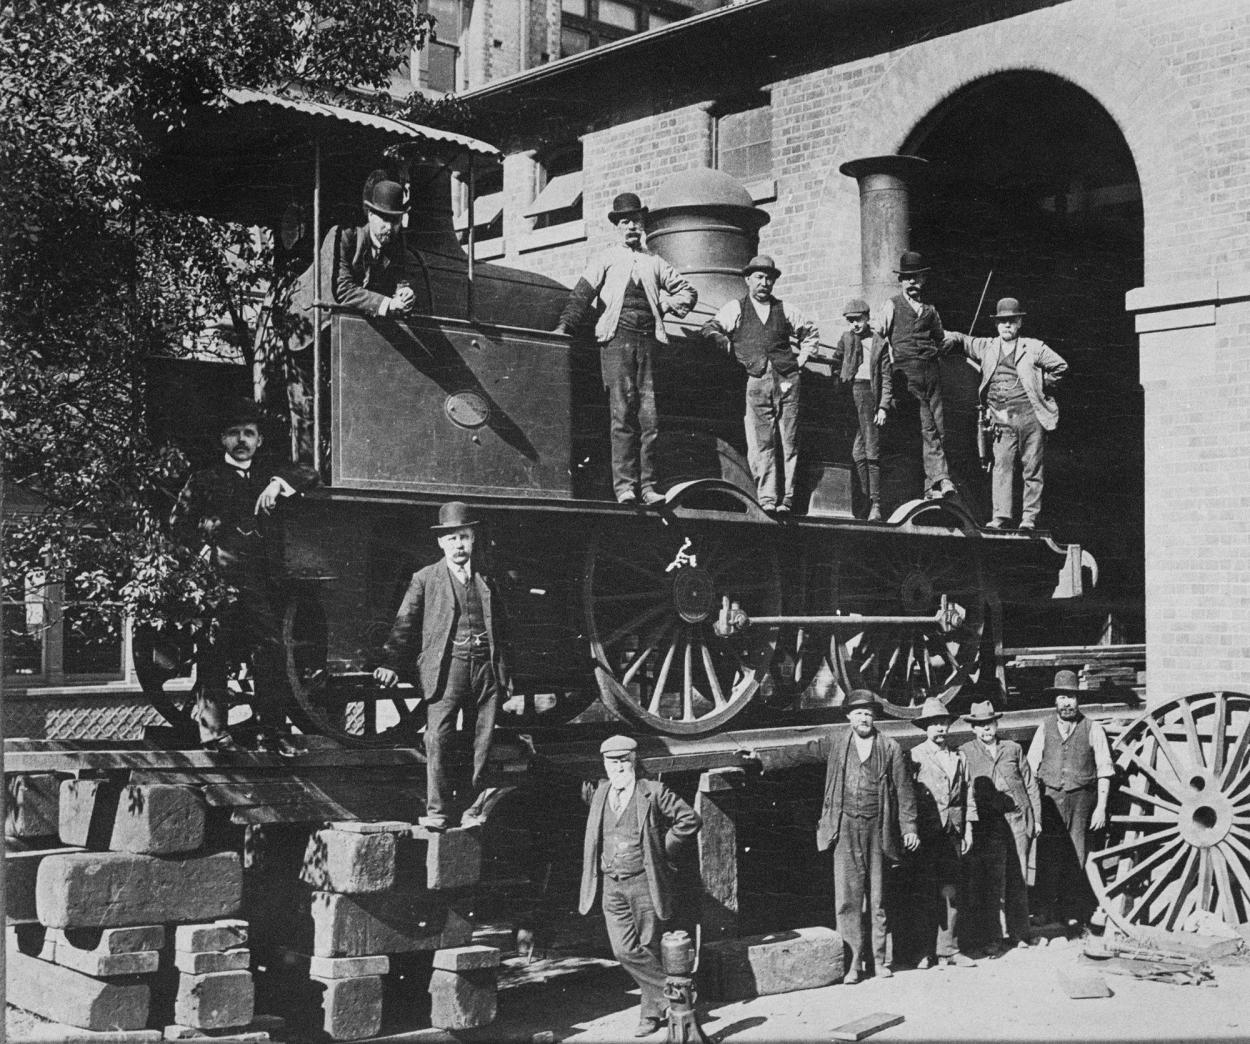 Black and white photograph of men standing on a steam train in front of a brick building